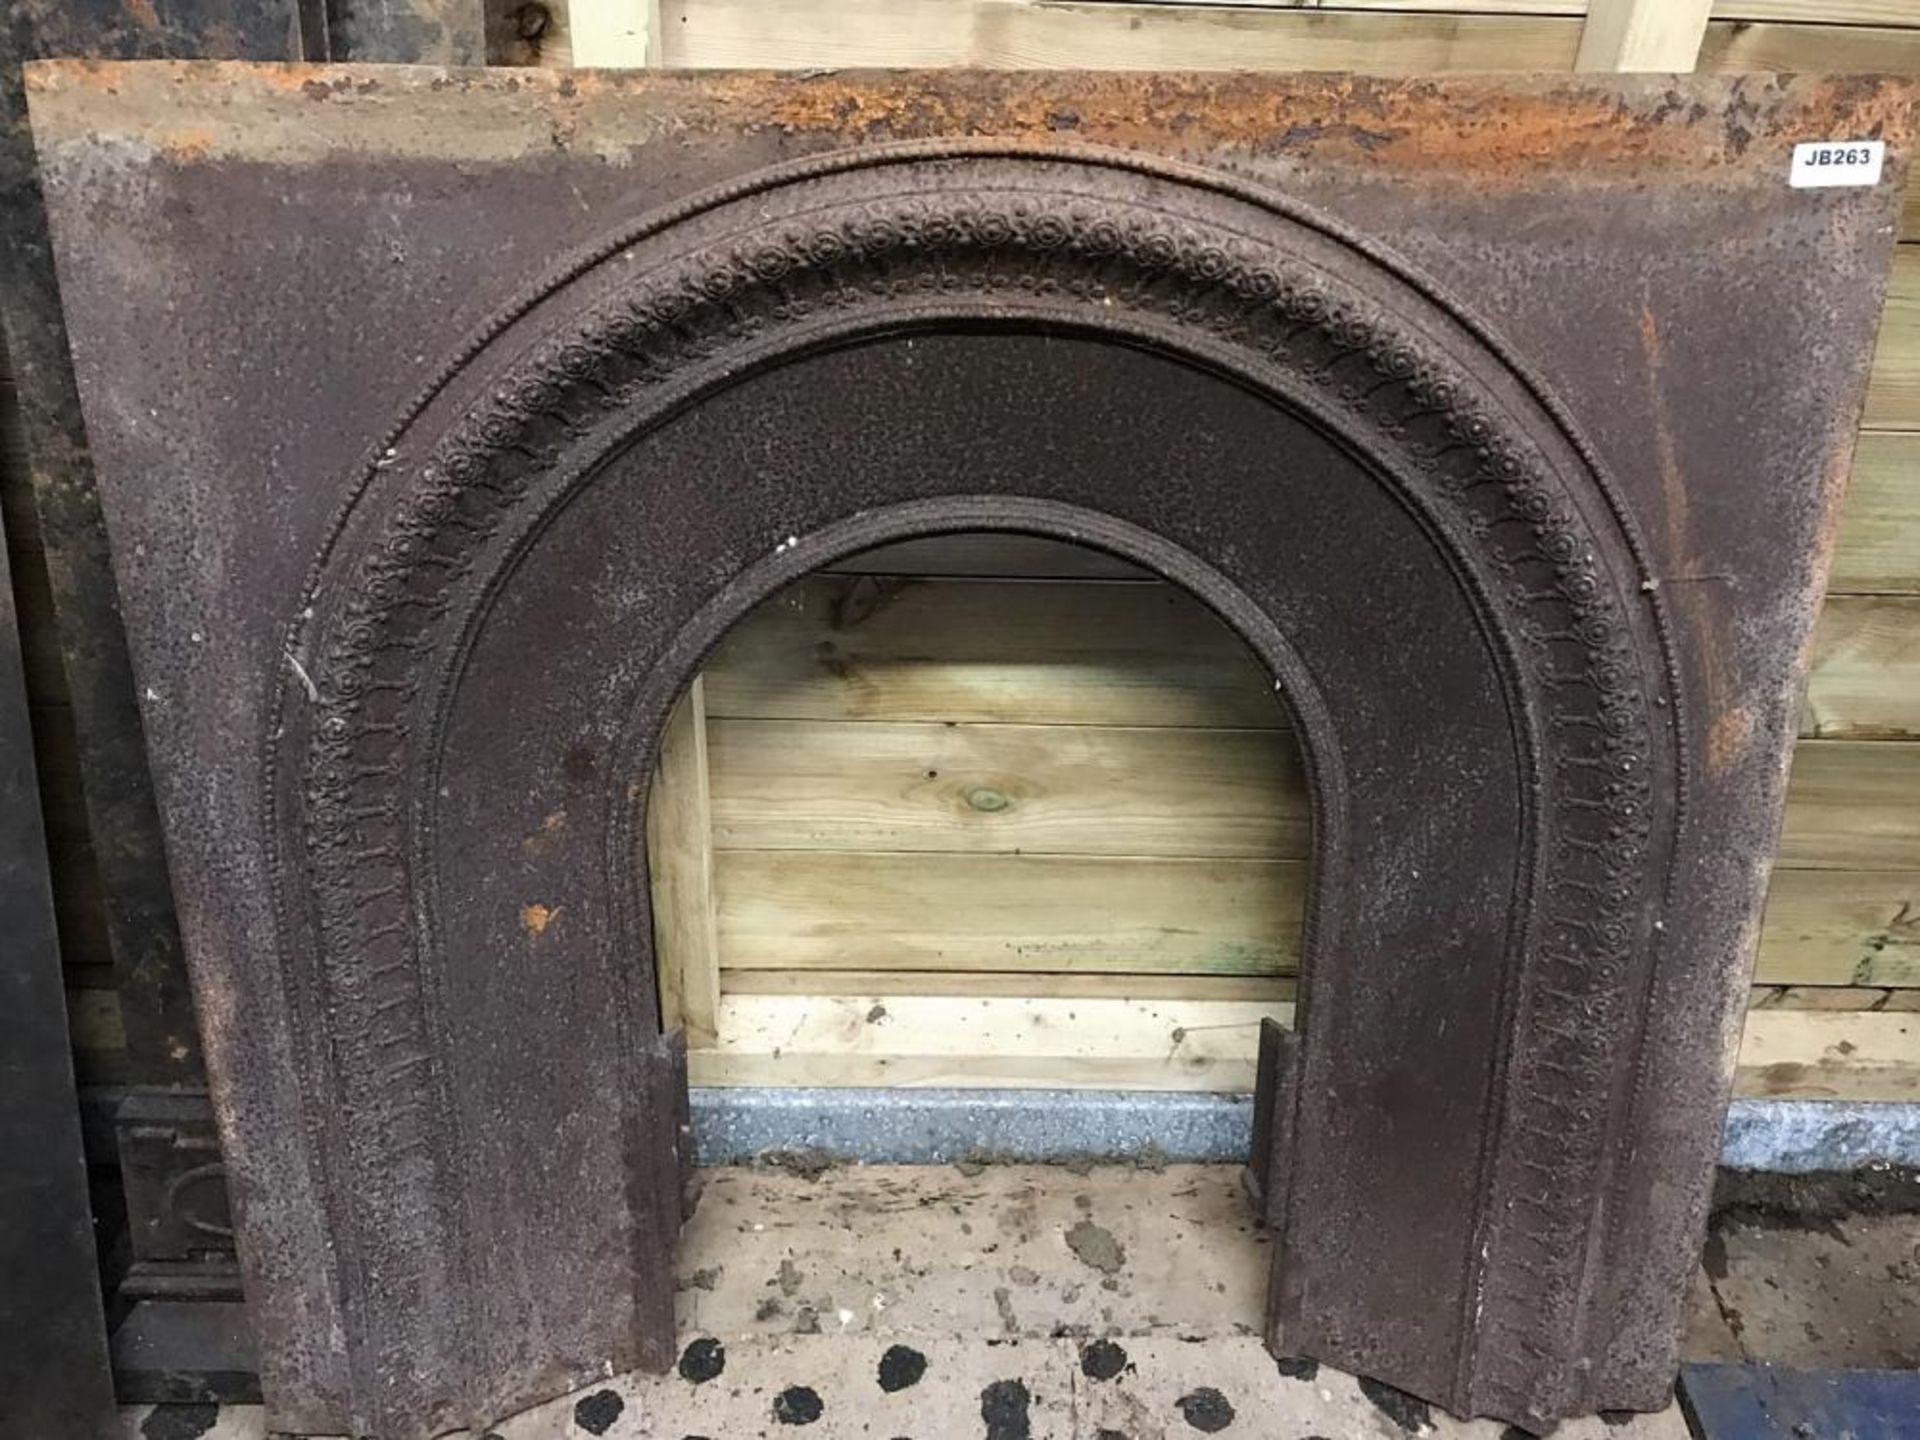 1 x Antique Victorian Cast Iron Fire Insert With Patterned Surround - Dimensions: Width 102cm x